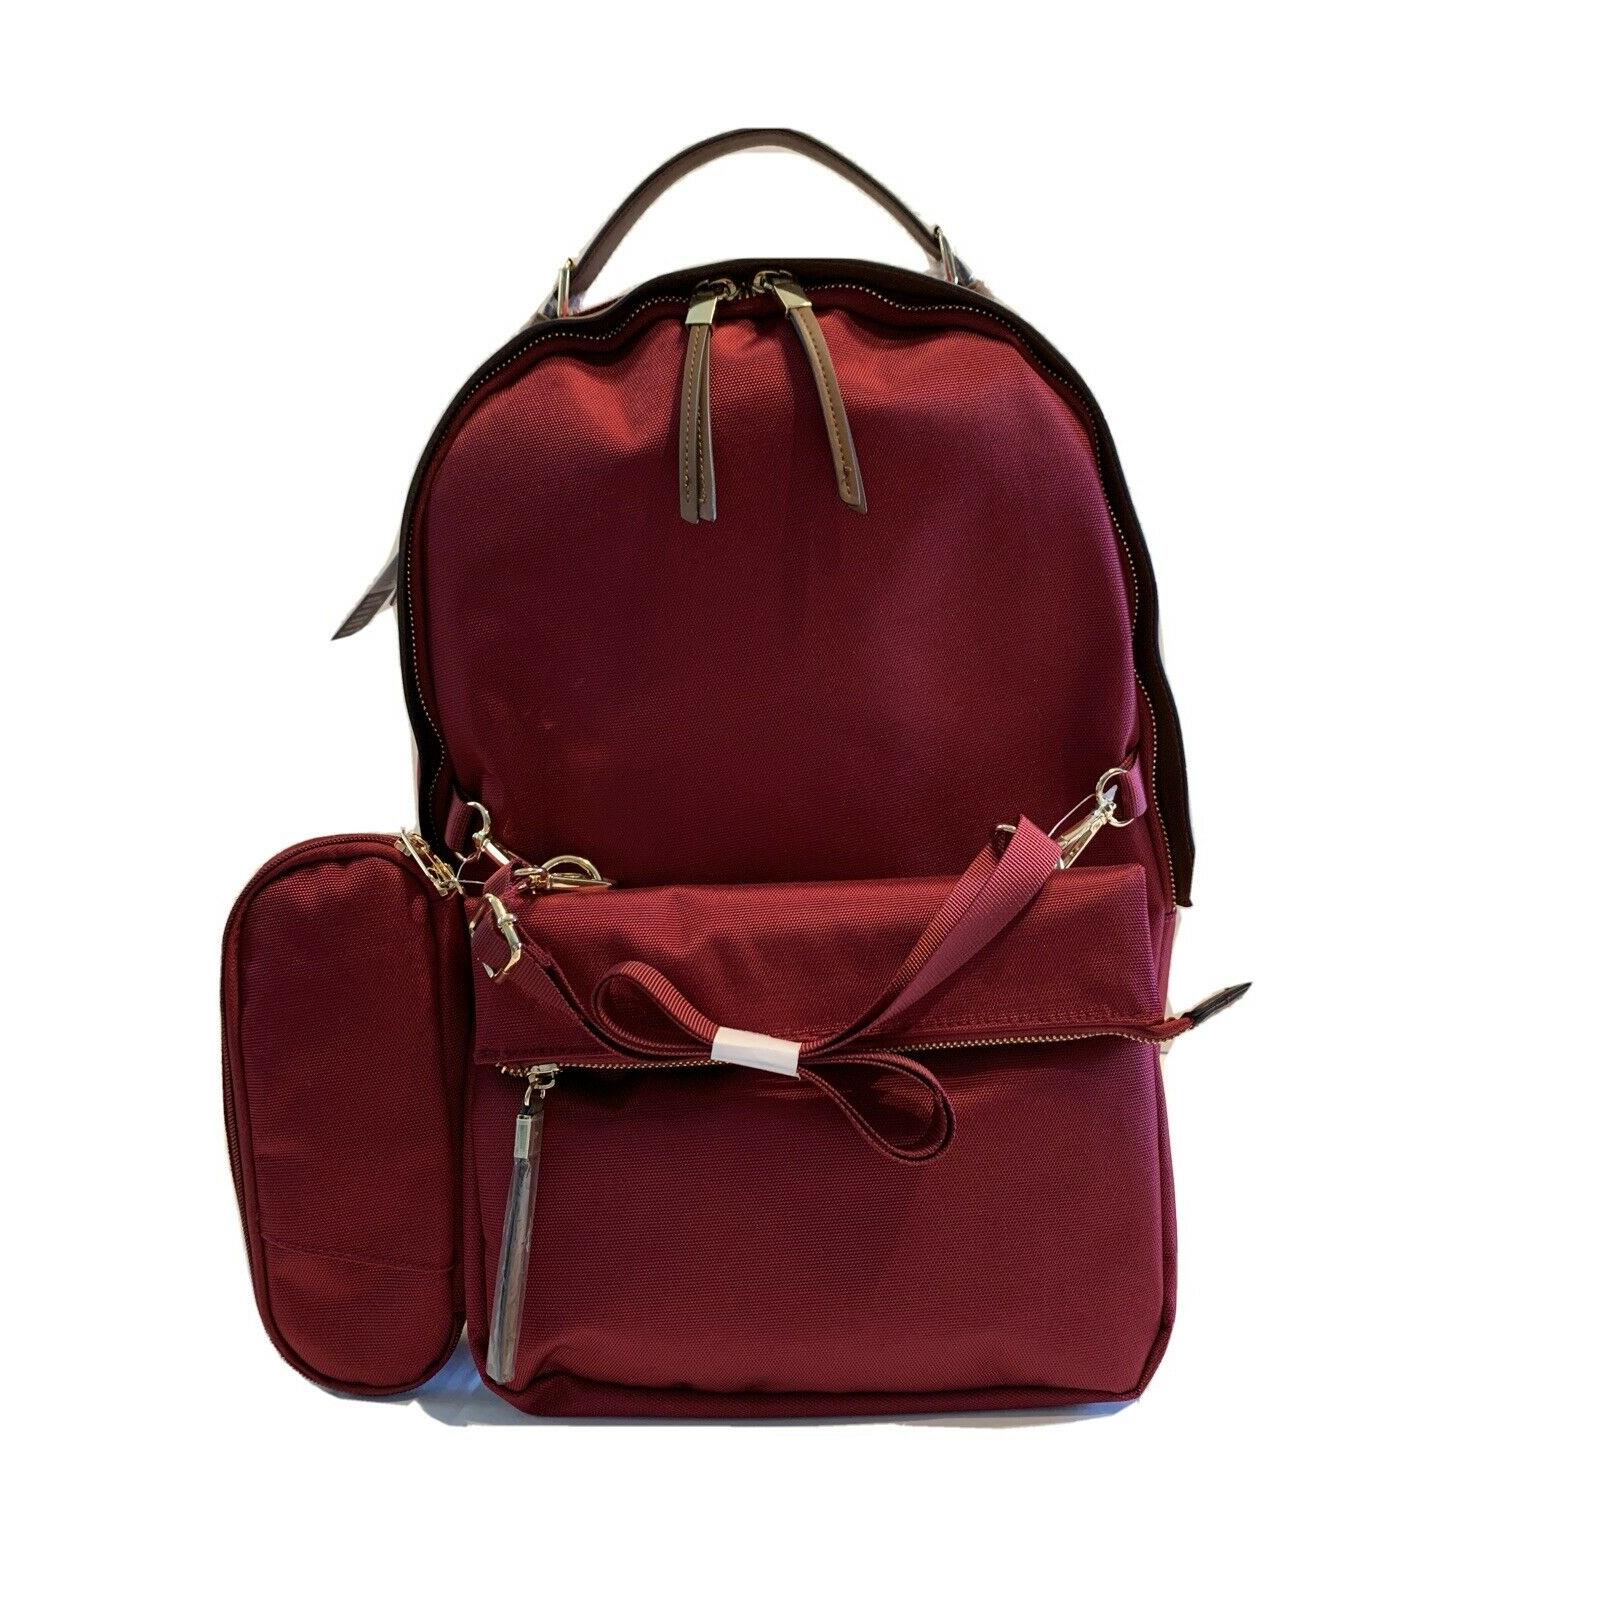 Tommy Bahama 3 PC Set Backpack Book Bag Maroon Burgundy Leather Handle and Trim